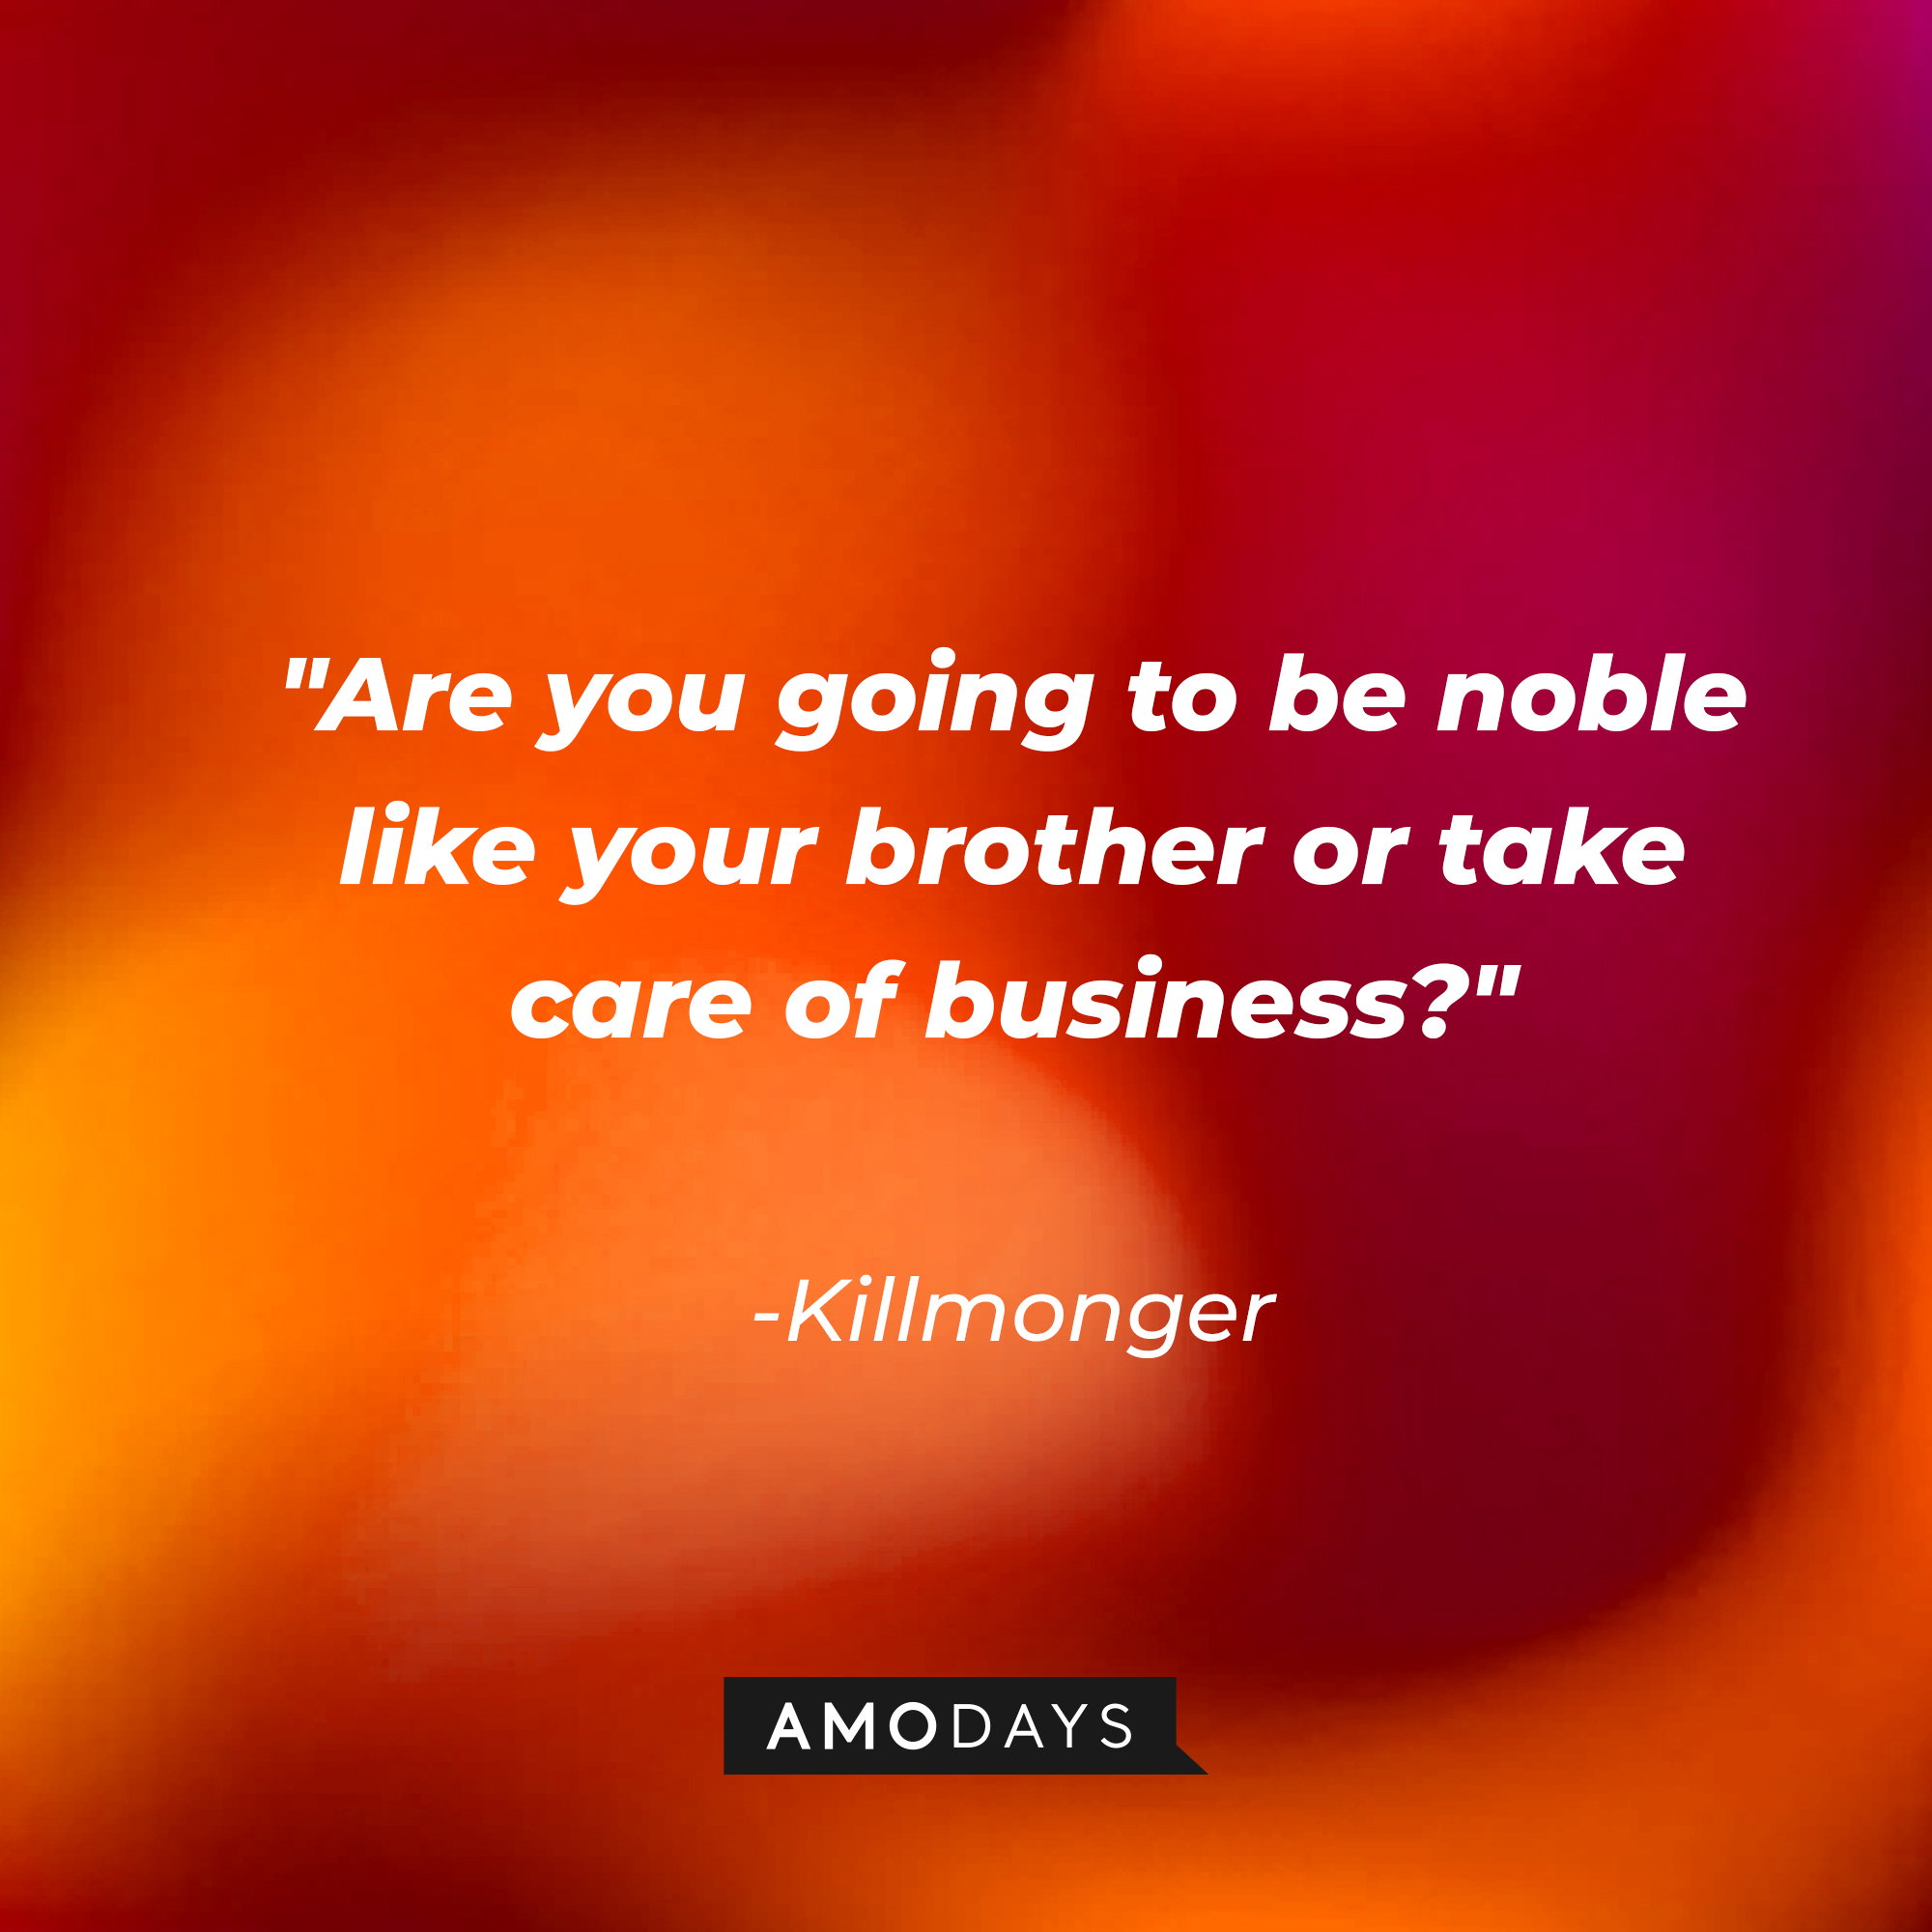 Killmonger's quote: "Are you going to be noble like your brother or take care of business?" | Source: AmoDays